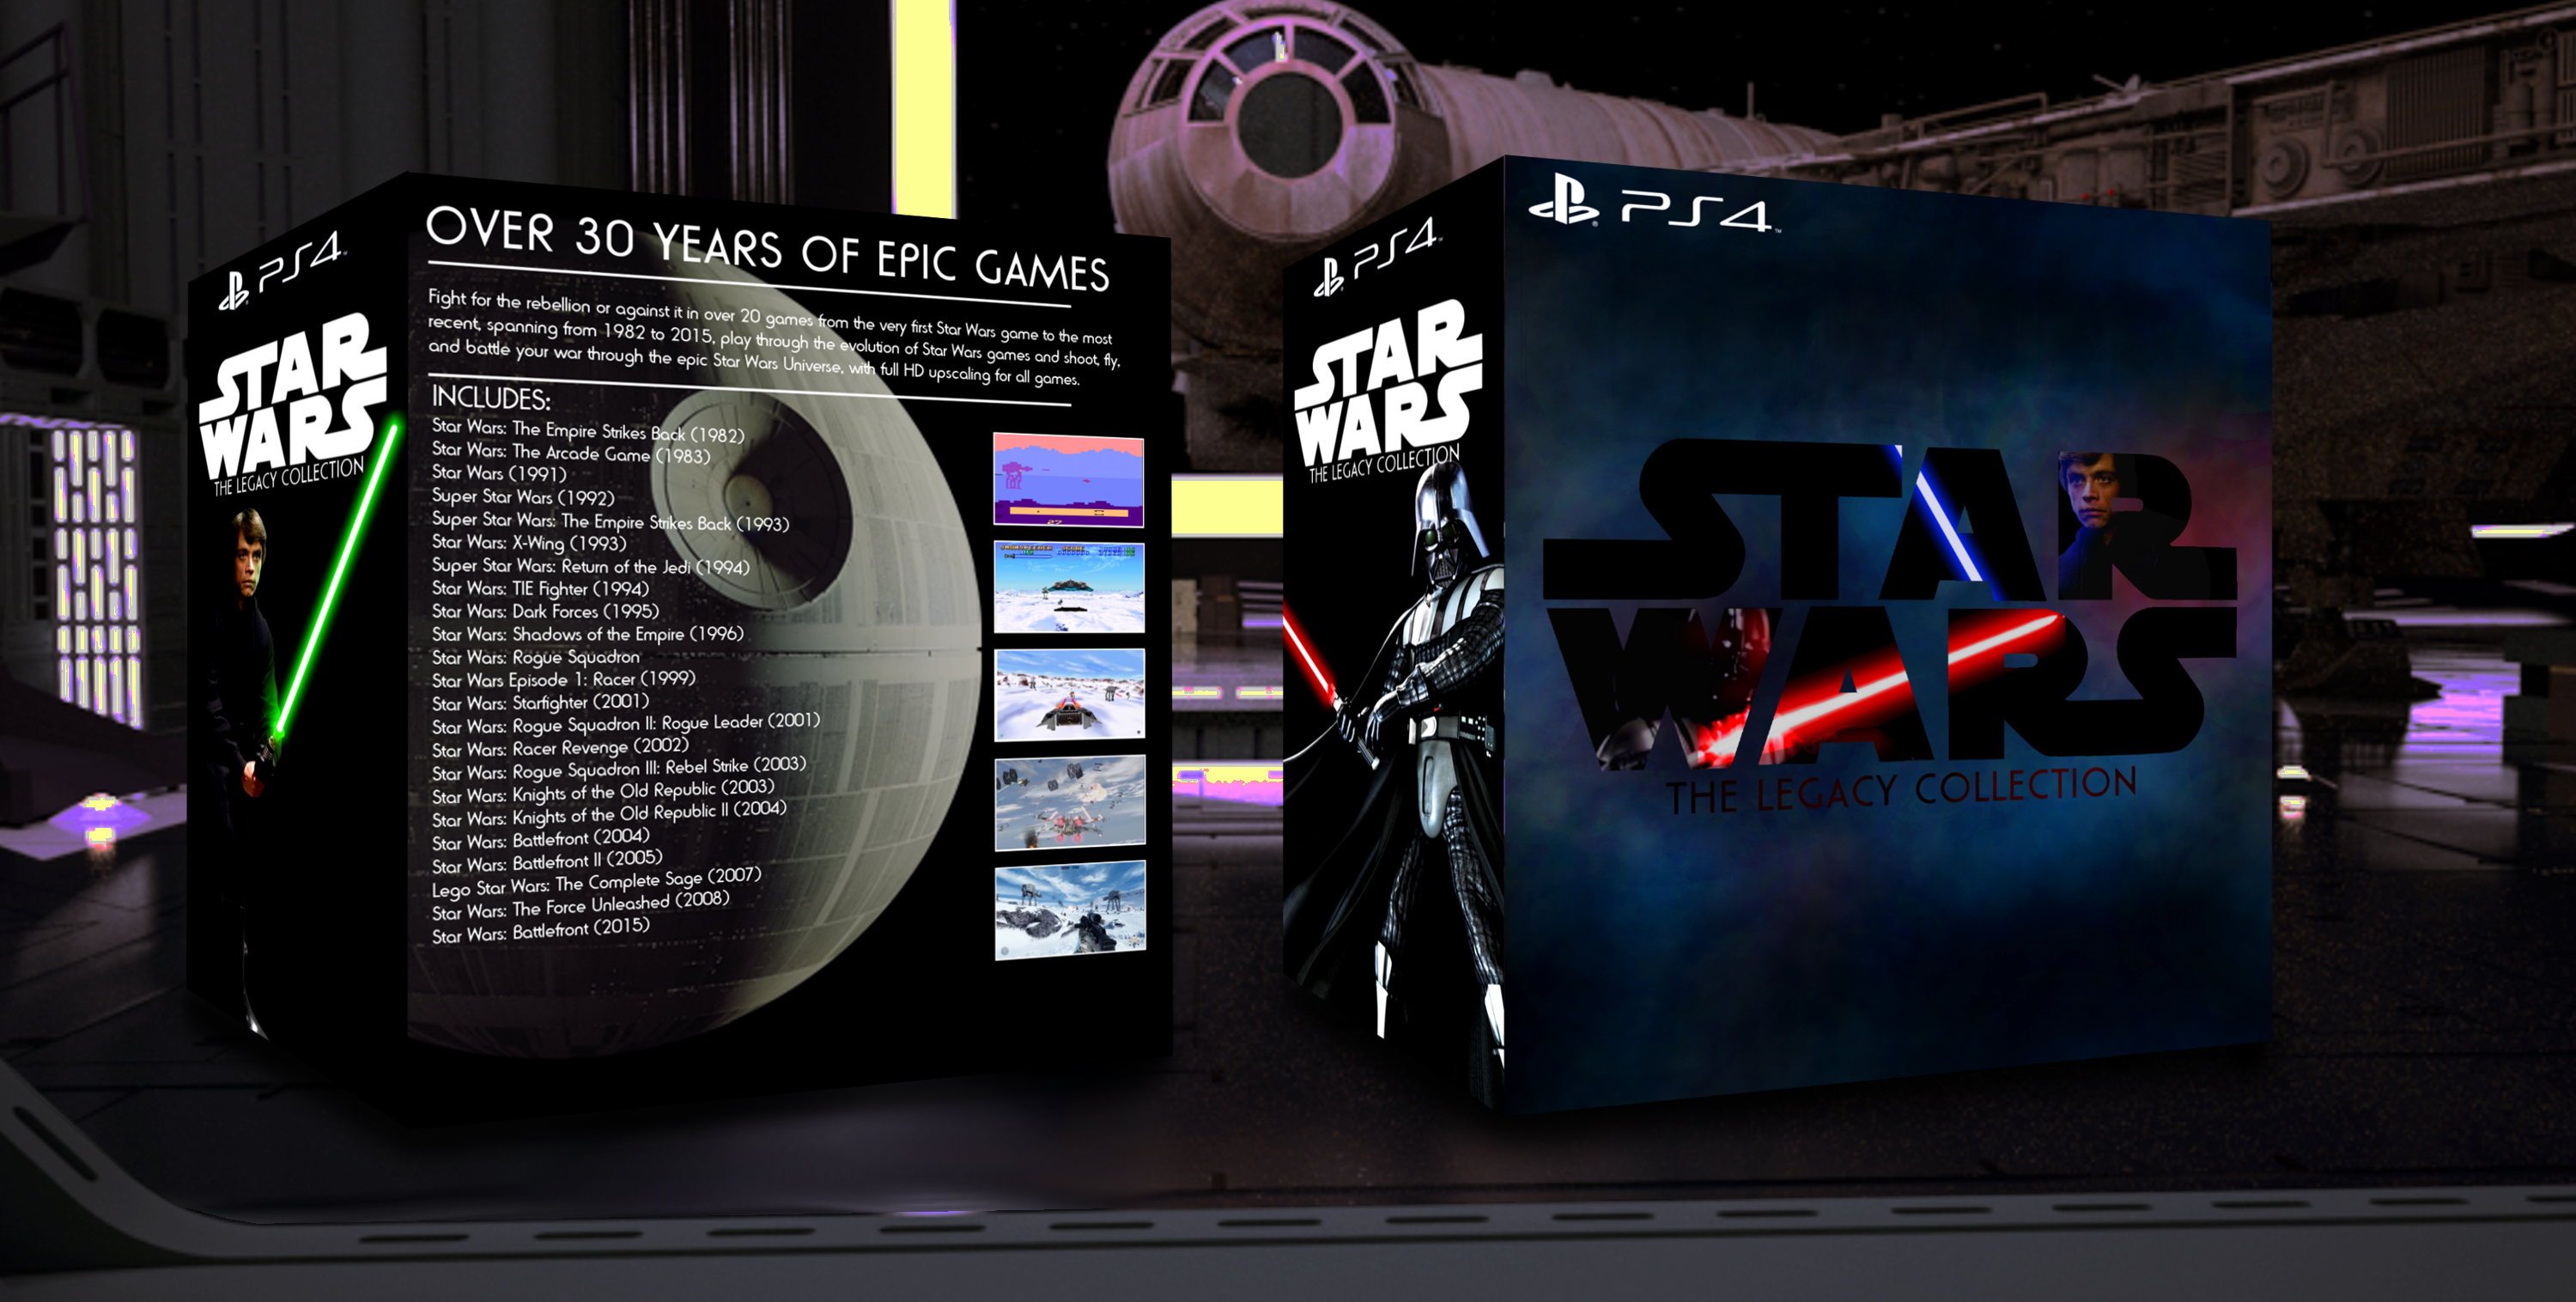 Star Wars: The Legacy Collection box cover